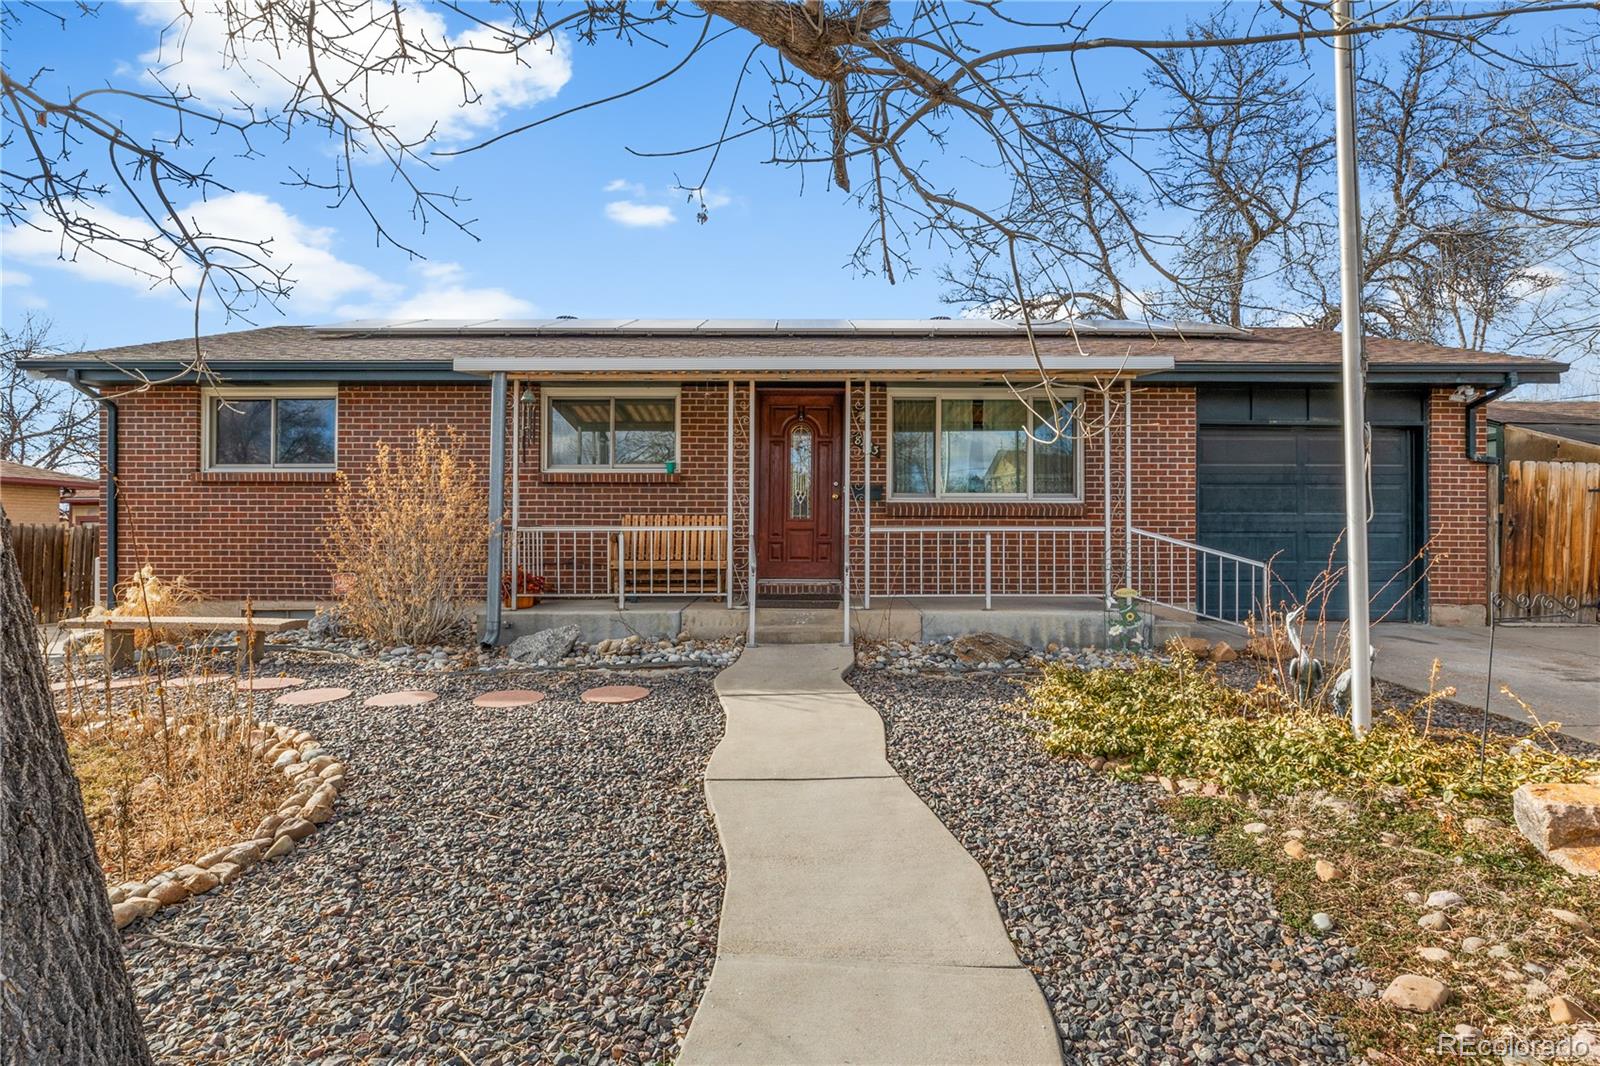 Report Image for 8423  Rutgers Street,Westminster, Colorado